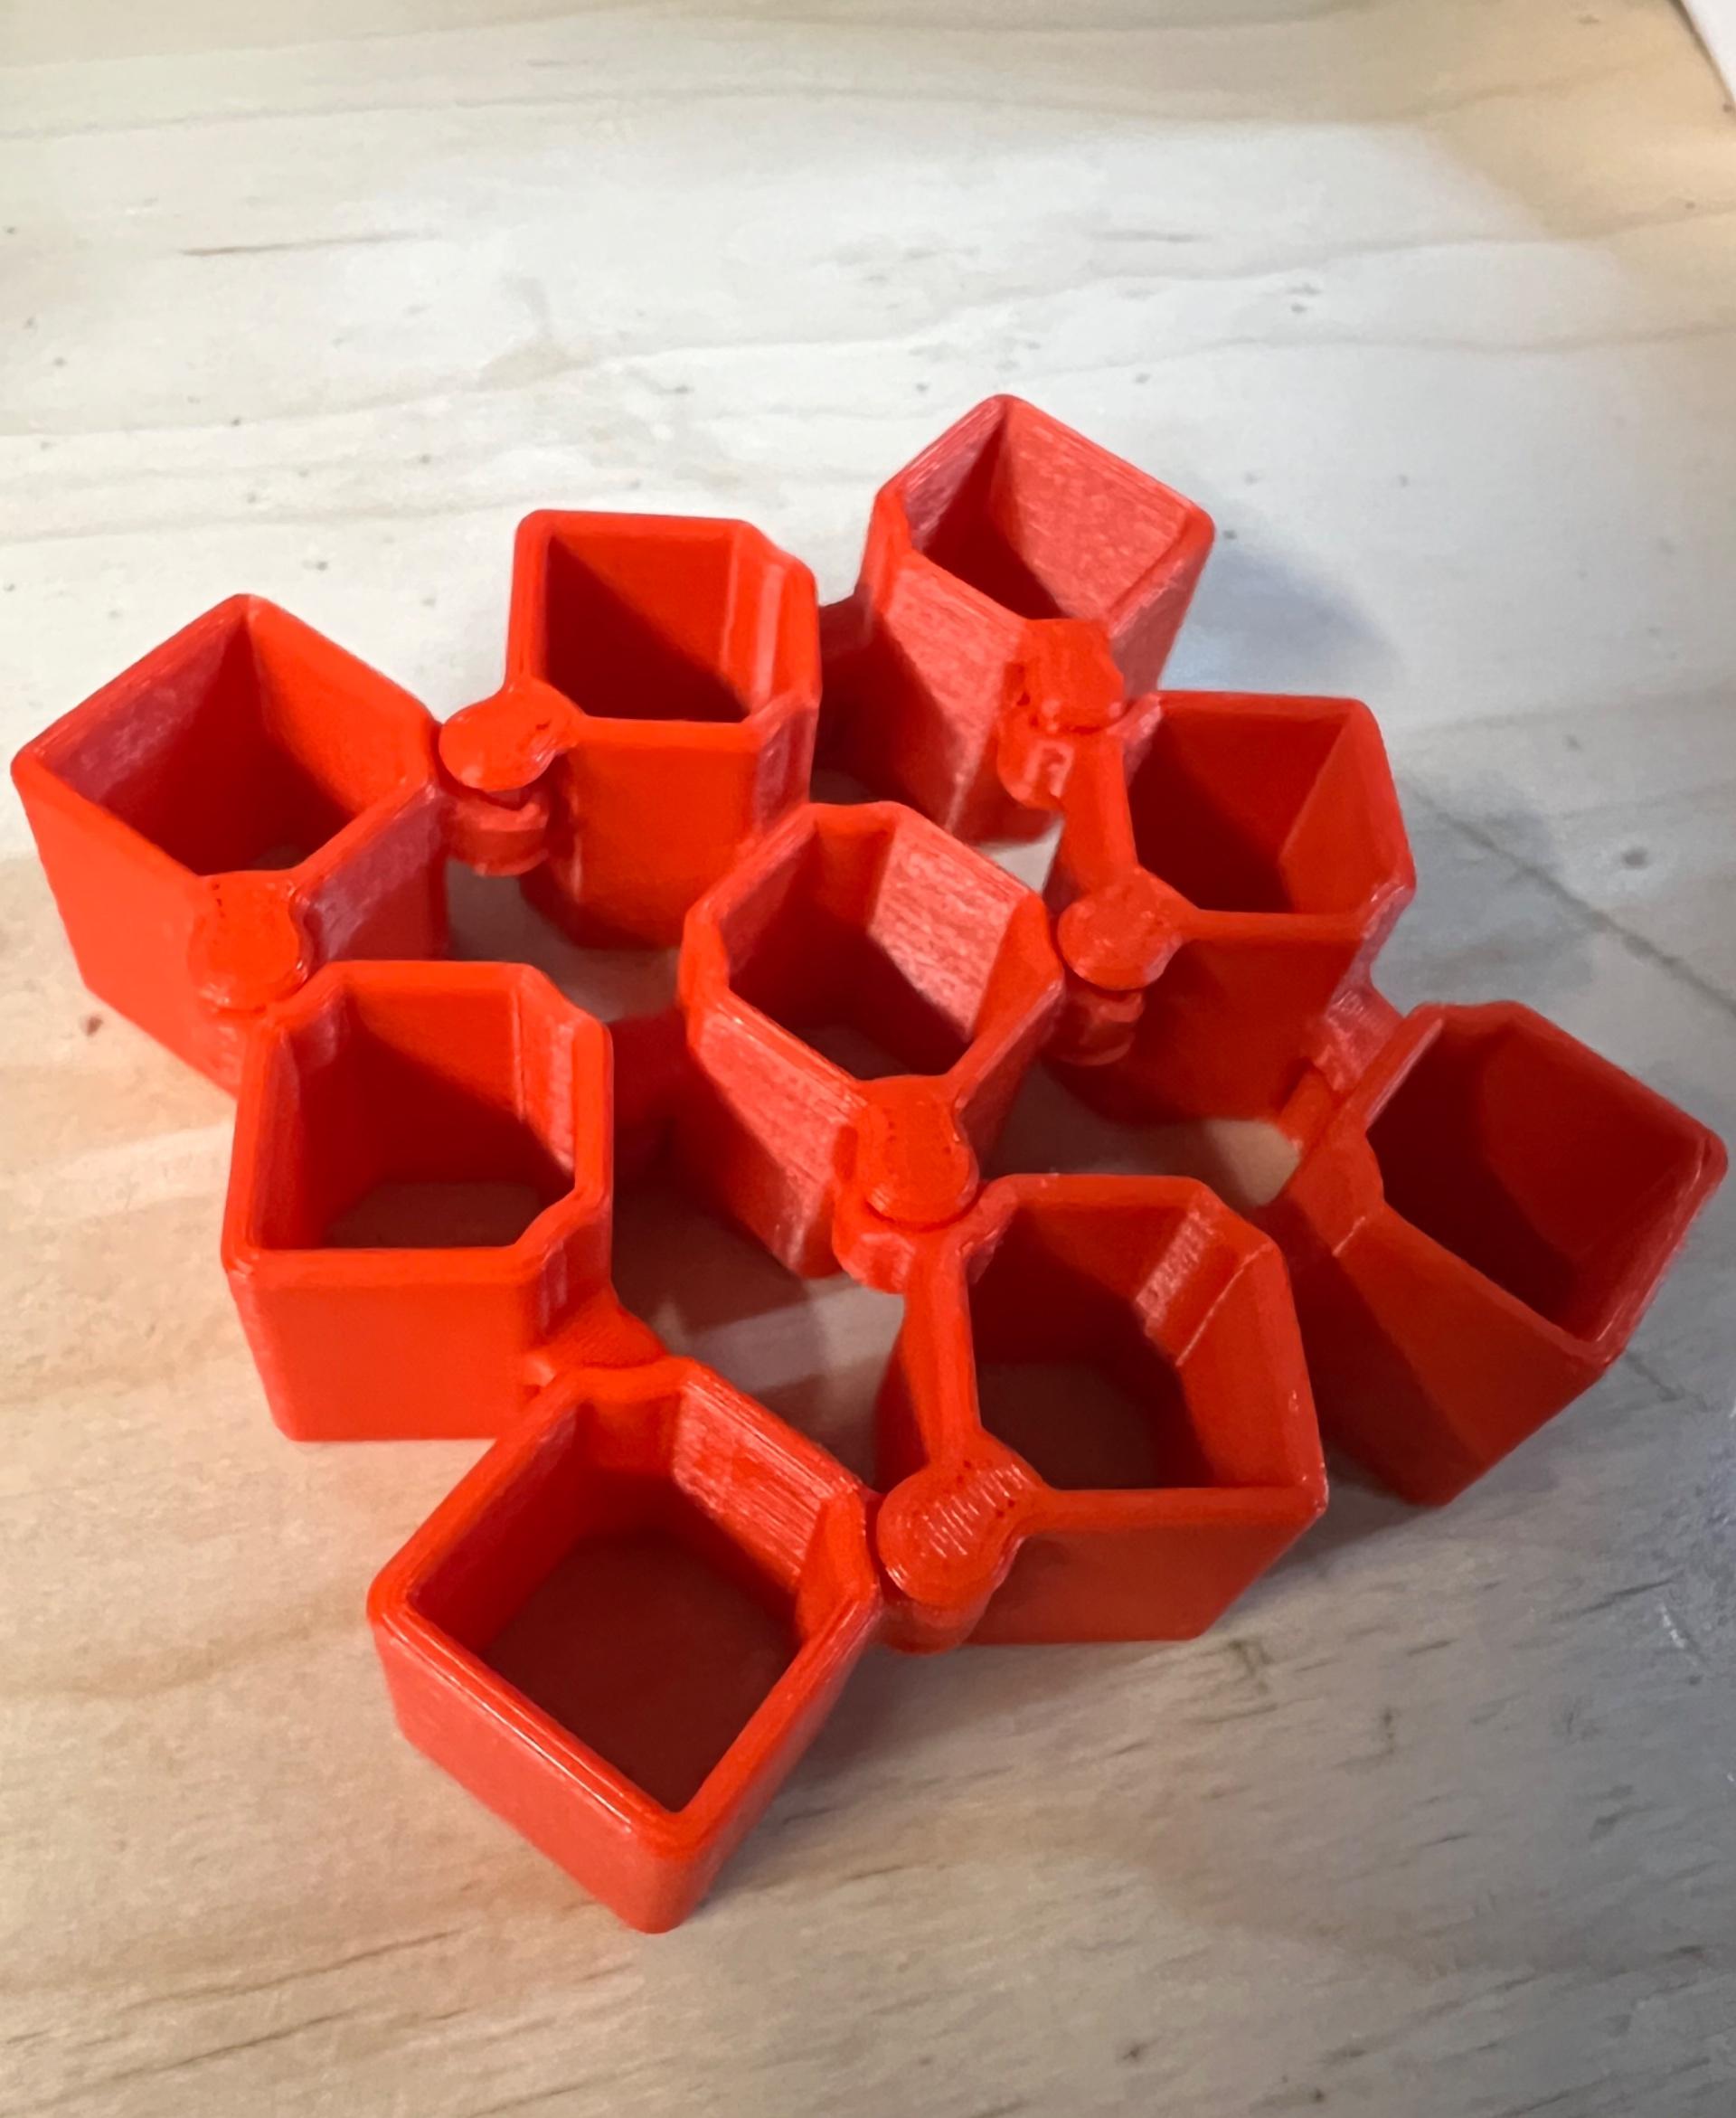 Auxetic Cubes // 18mm 3x3 - These were super simple! Thanks for the cool design! - 3d model